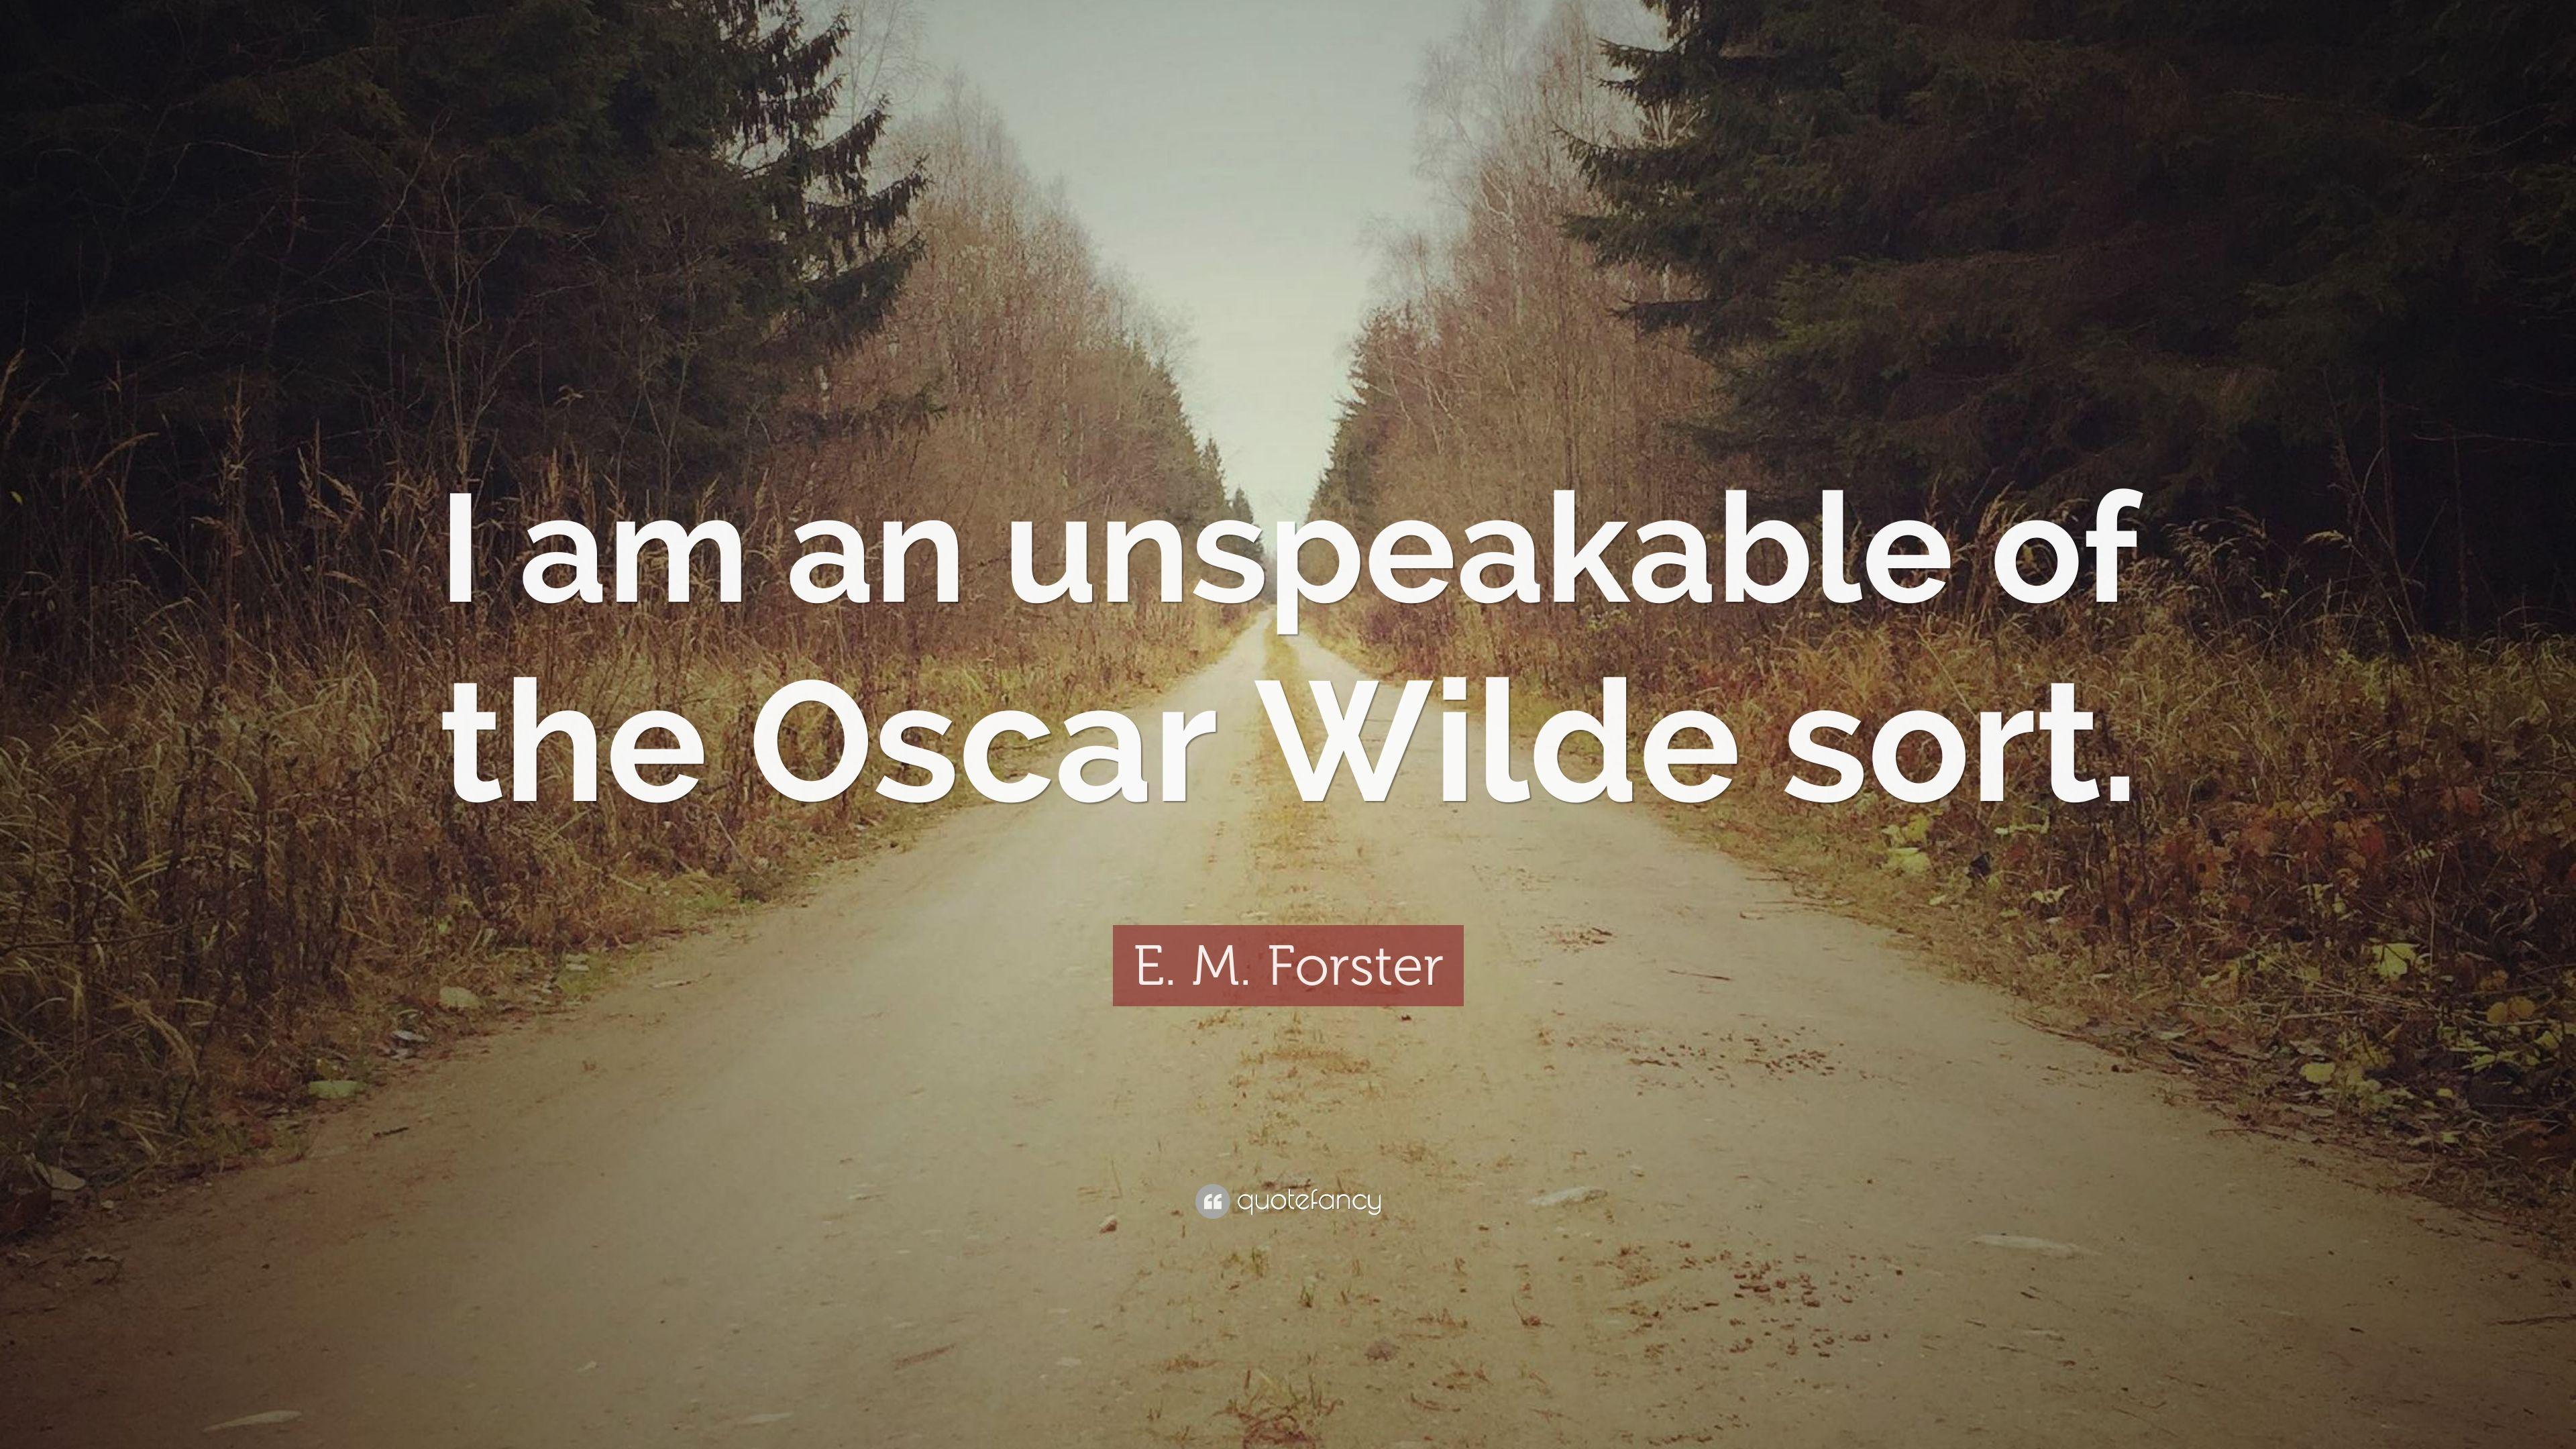 E. M. Forster Quote: “I am an unspeakable of the Oscar Wilde sort